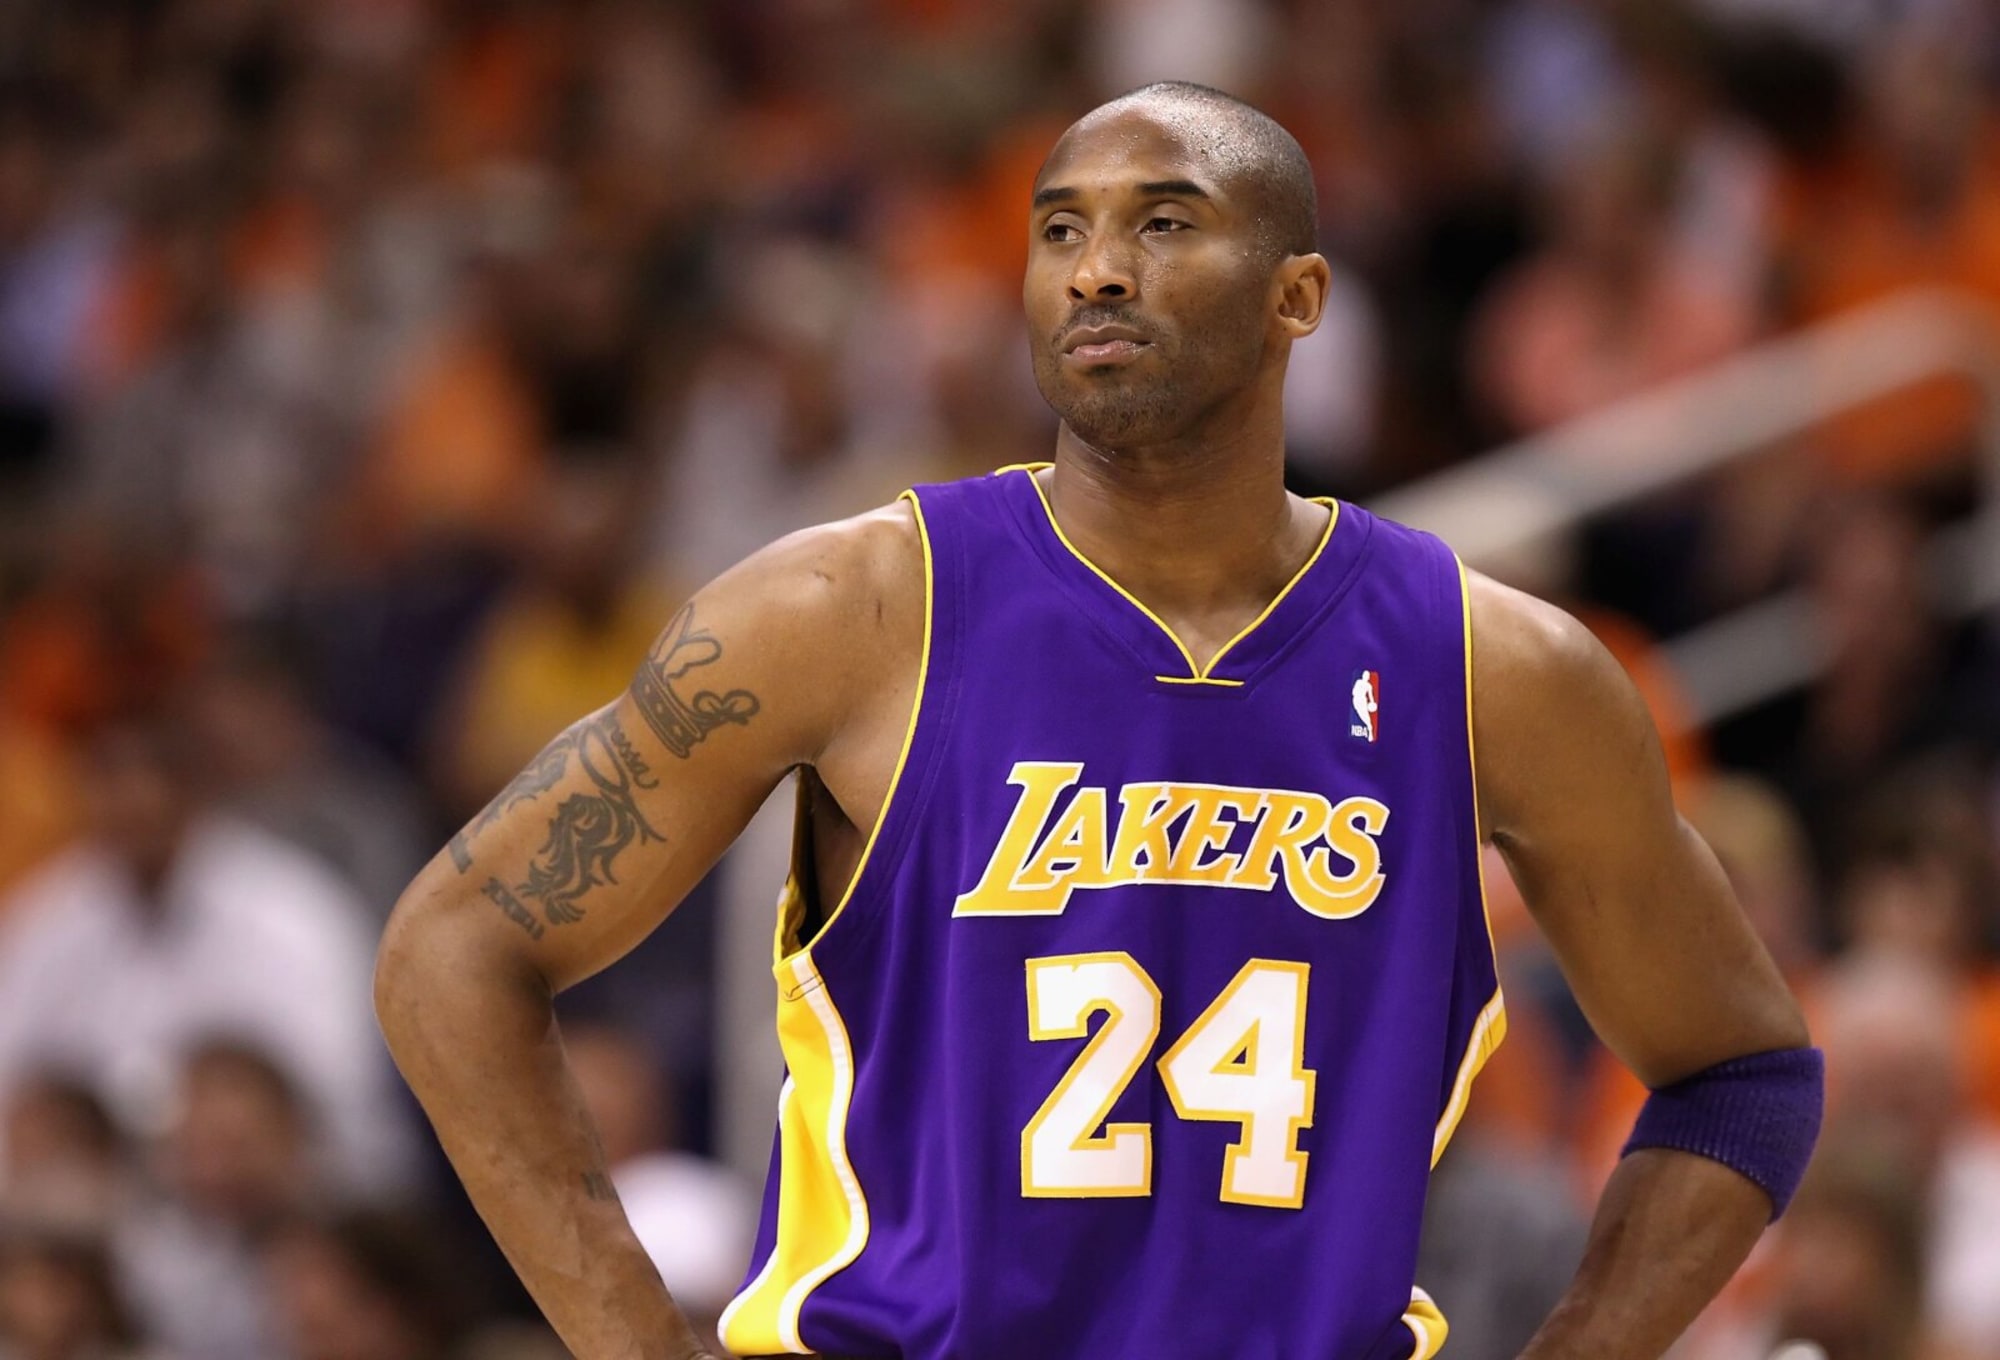 Kobe Bryant Biography, Facts, Career, Family, Spouse, Net Worth